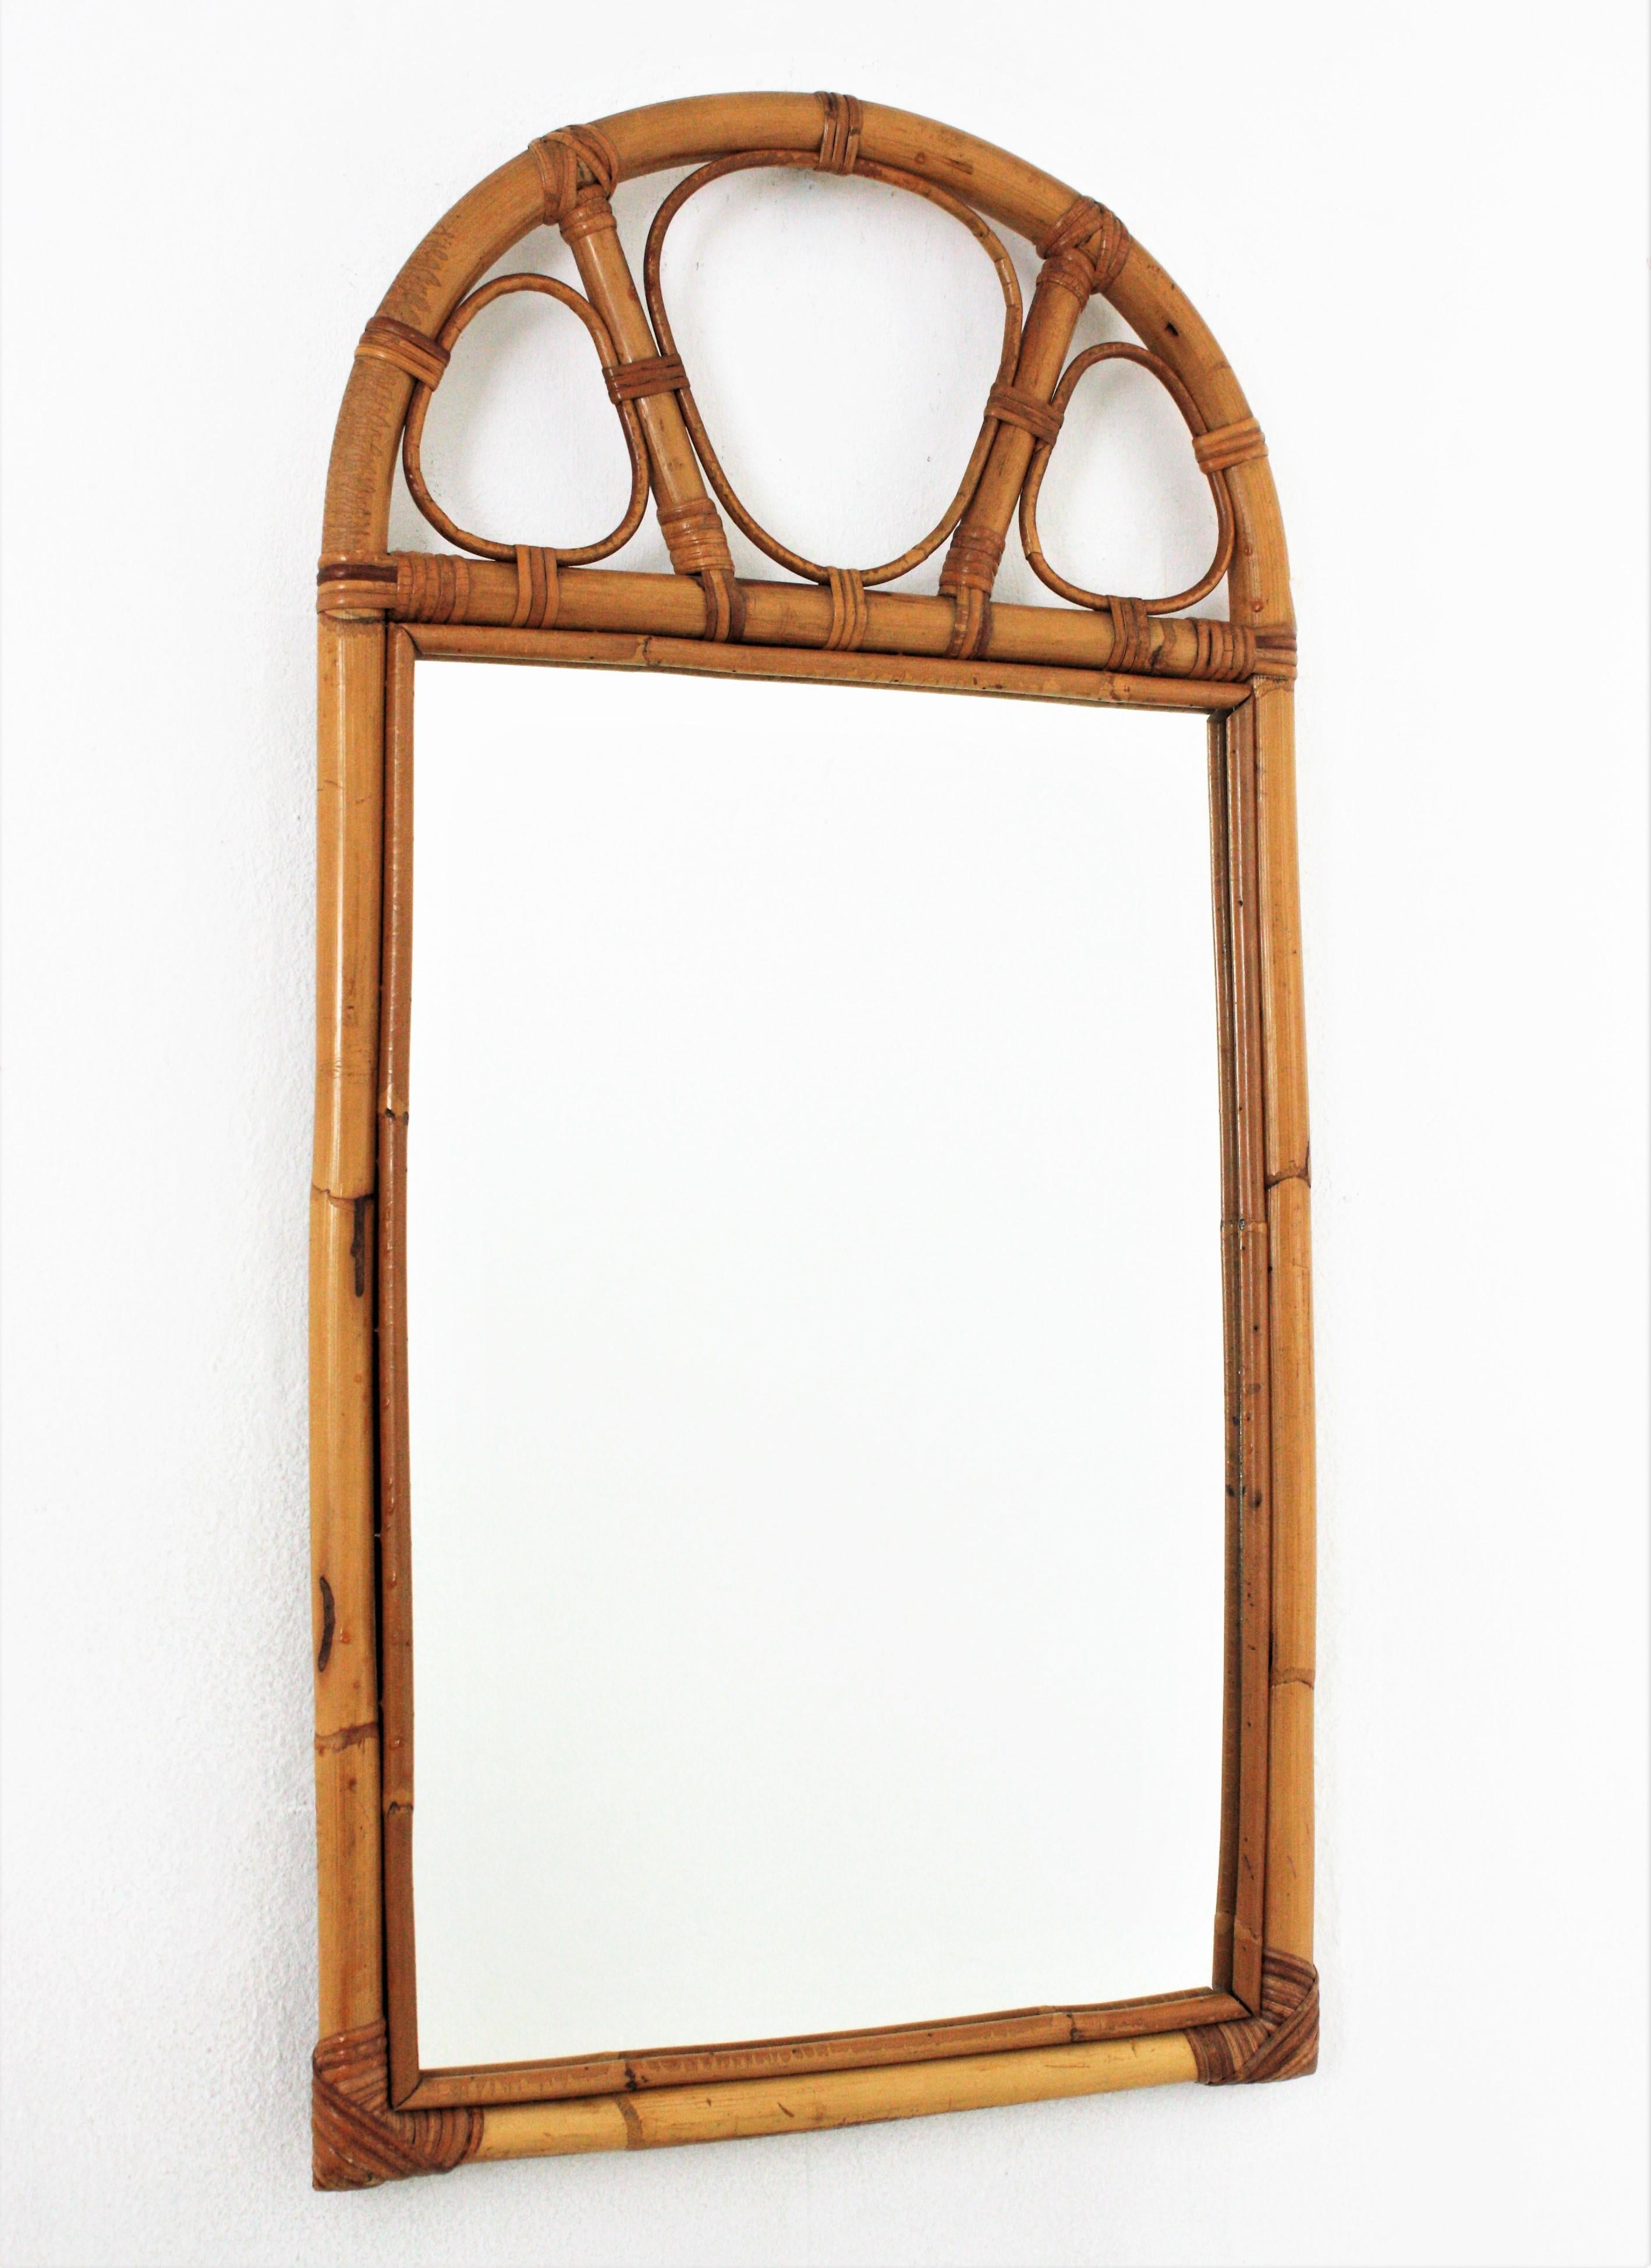 Eye-catching midcentury bamboo and rattan mirror with arched top. Spain, 1960s
This beautiful mirror was handcrafted with bamboo cane and rattan combining midcentury and oriental accents.
It will be a nice addition to be used in a bathroom or as